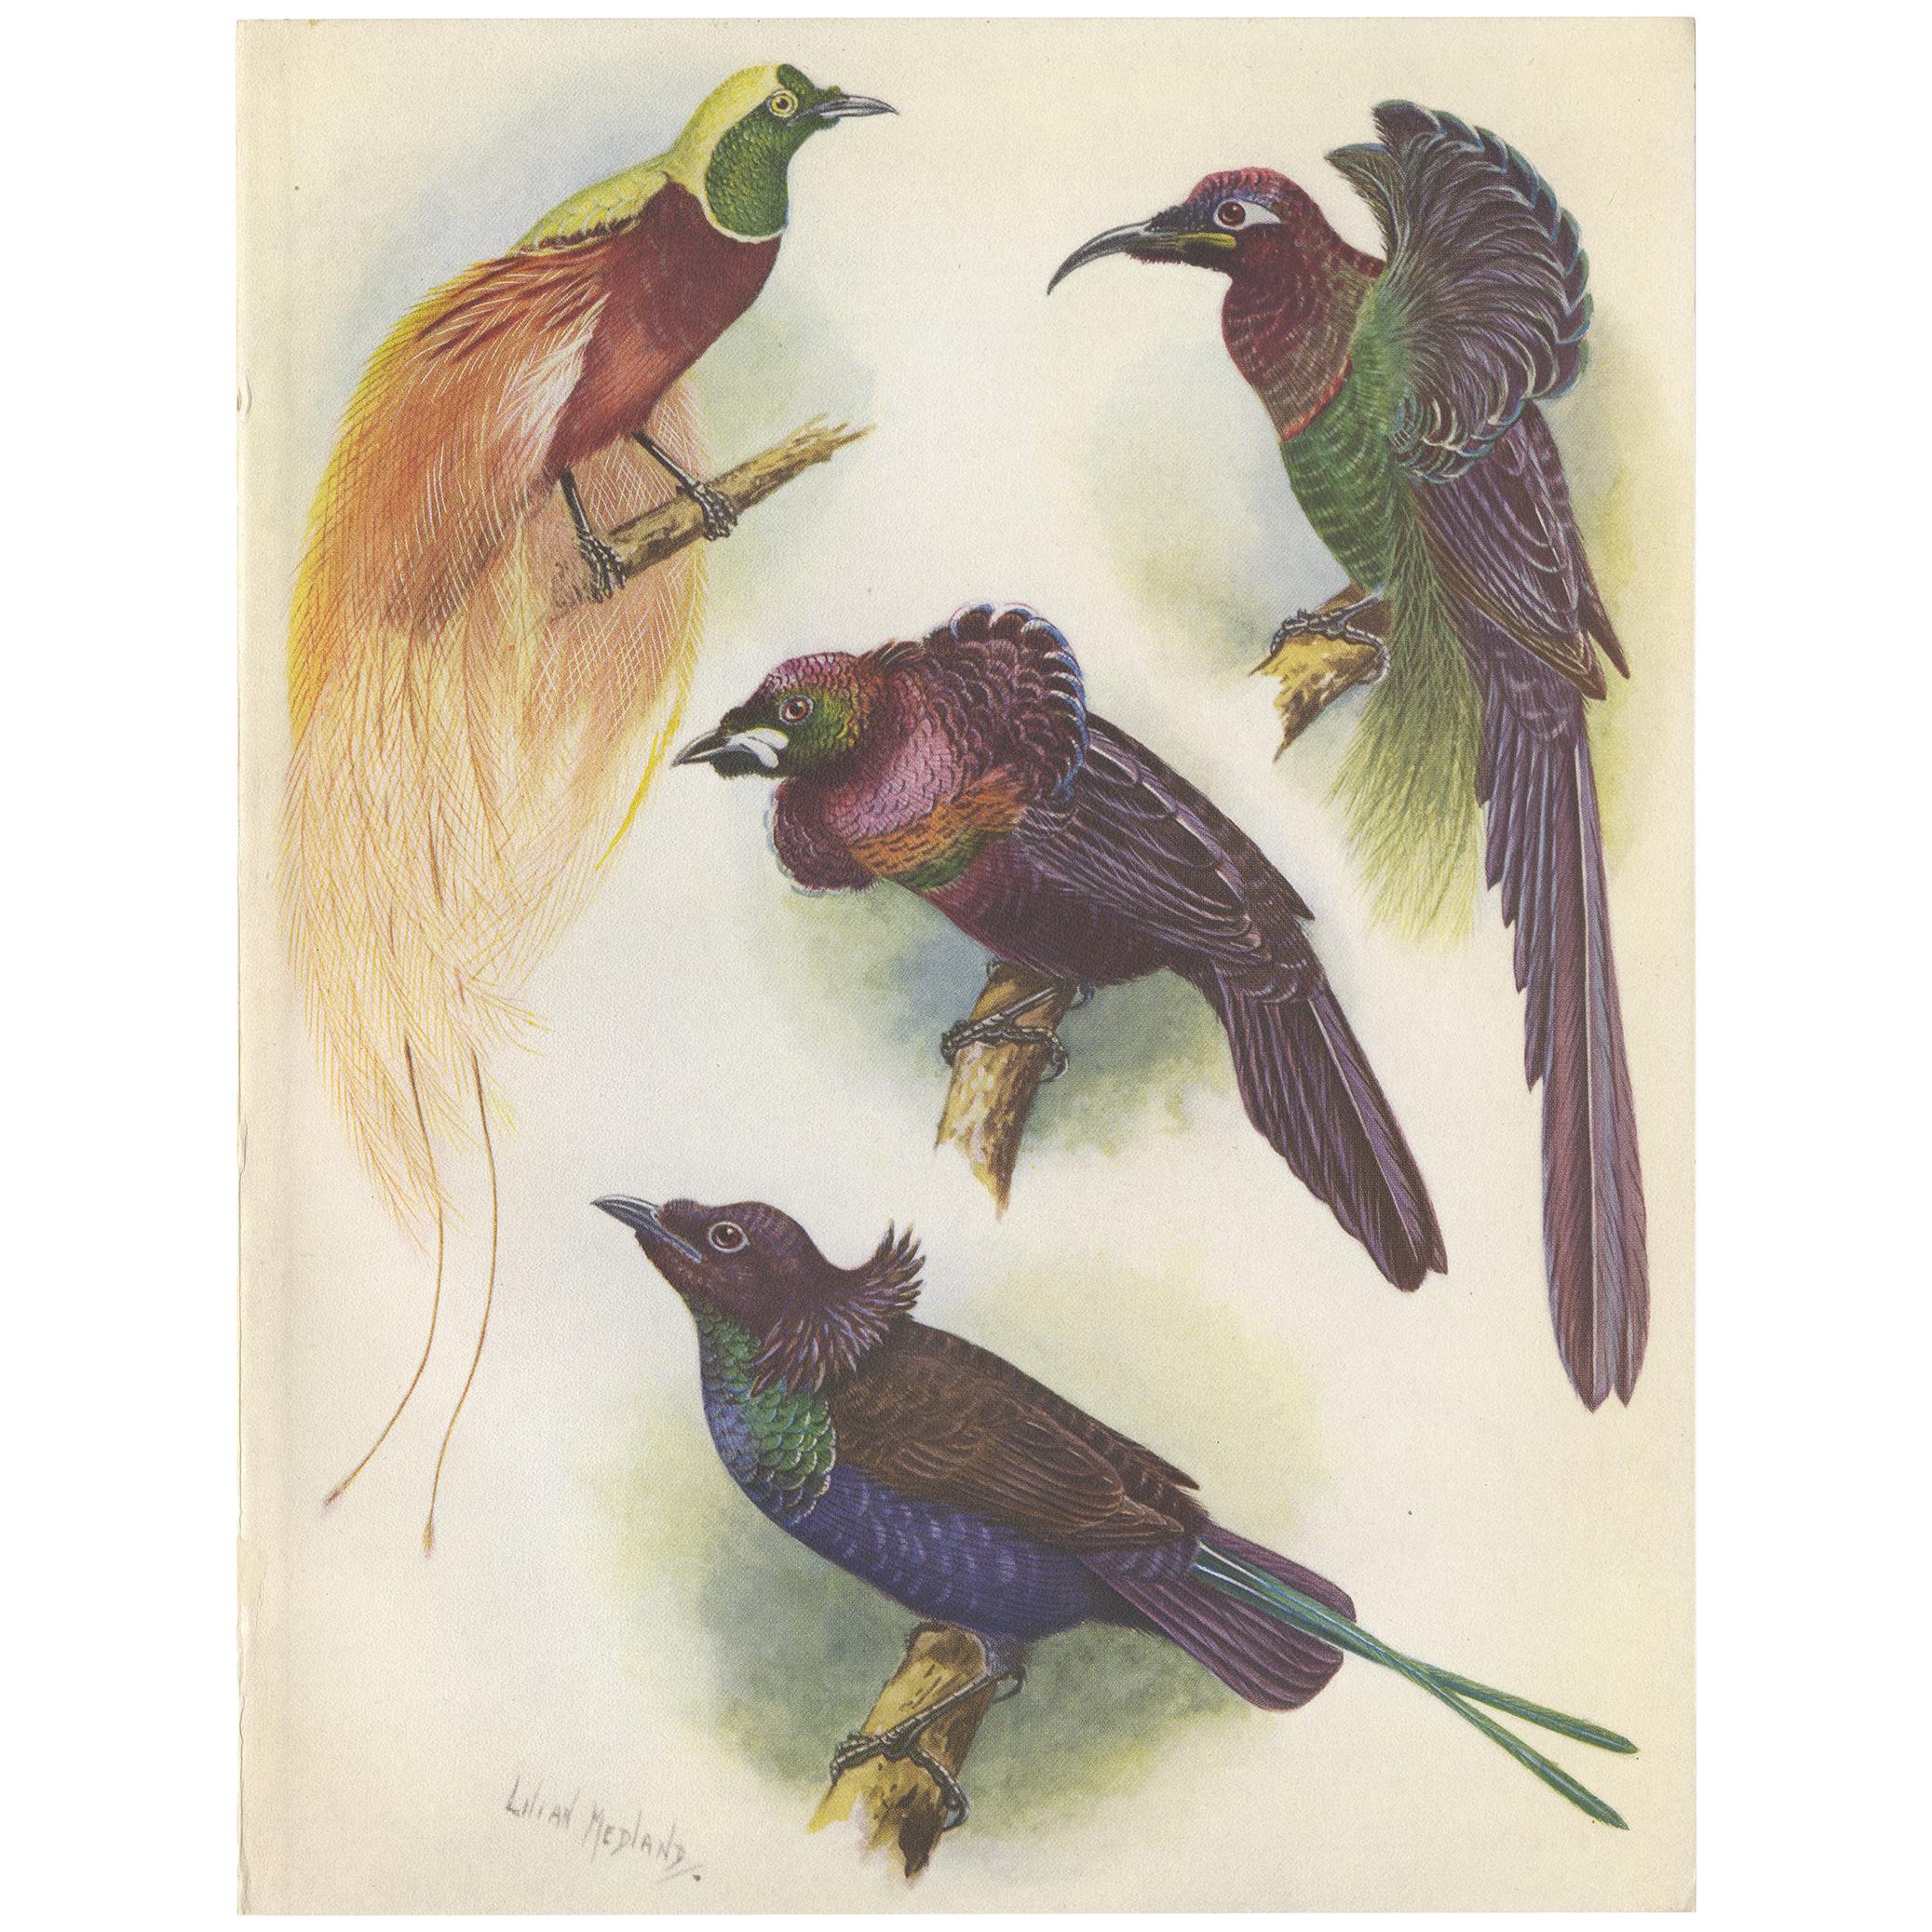 Antique Print of the Mrs Reichenow's Bird of Paradise and Others, 1950